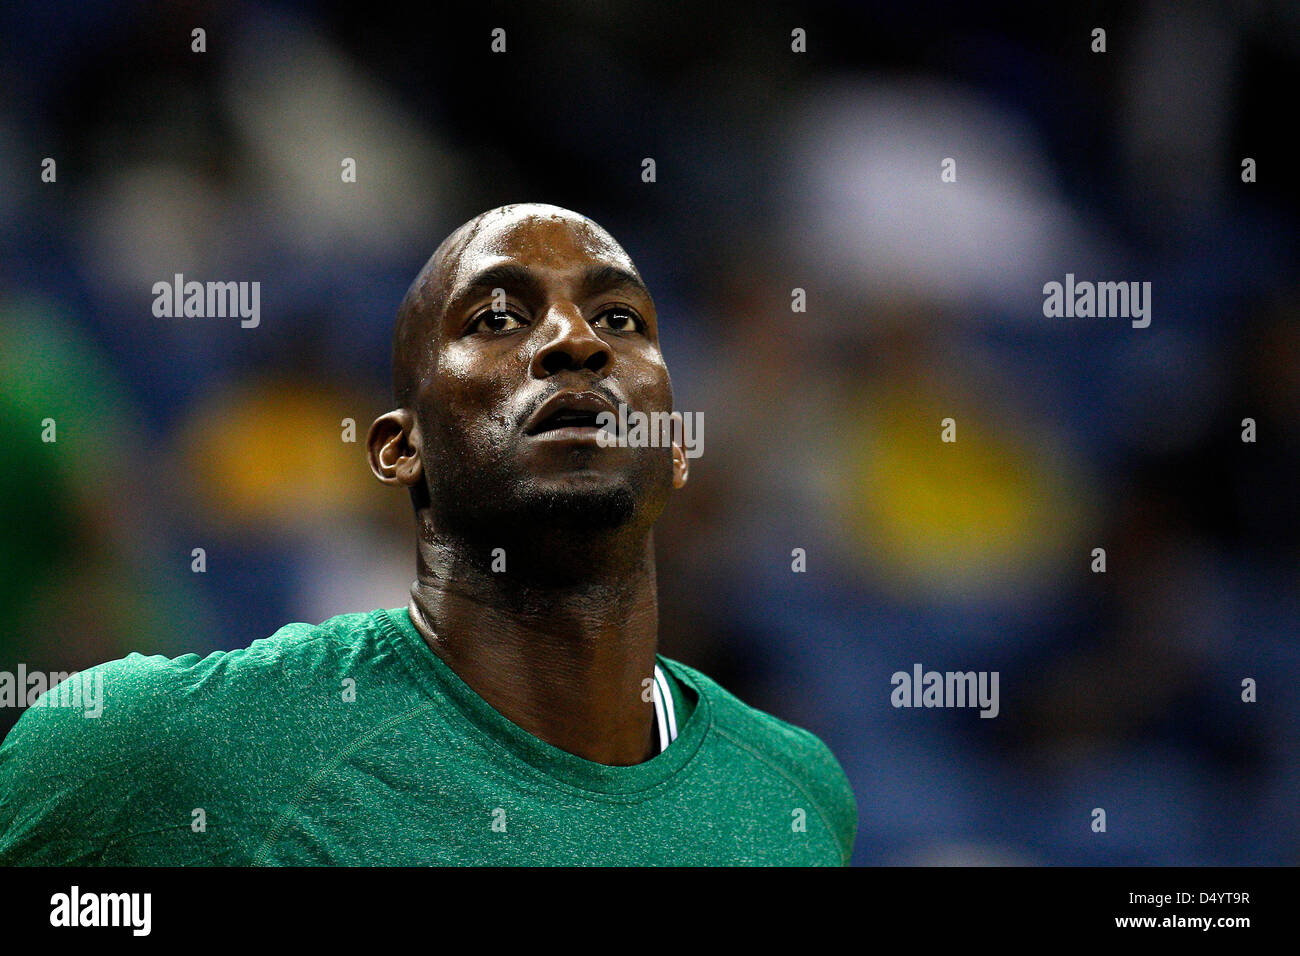 March 20, 2013 - New Orleans, Louisiana, United States of America - March 20, 2013: Boston Celtics center Kevin Garnett warms up (5) before the NBA basketball game between the New Orleans Hornets and the Boston Celtics at the New Orleans Arena in New Orleans, LA. Stock Photo